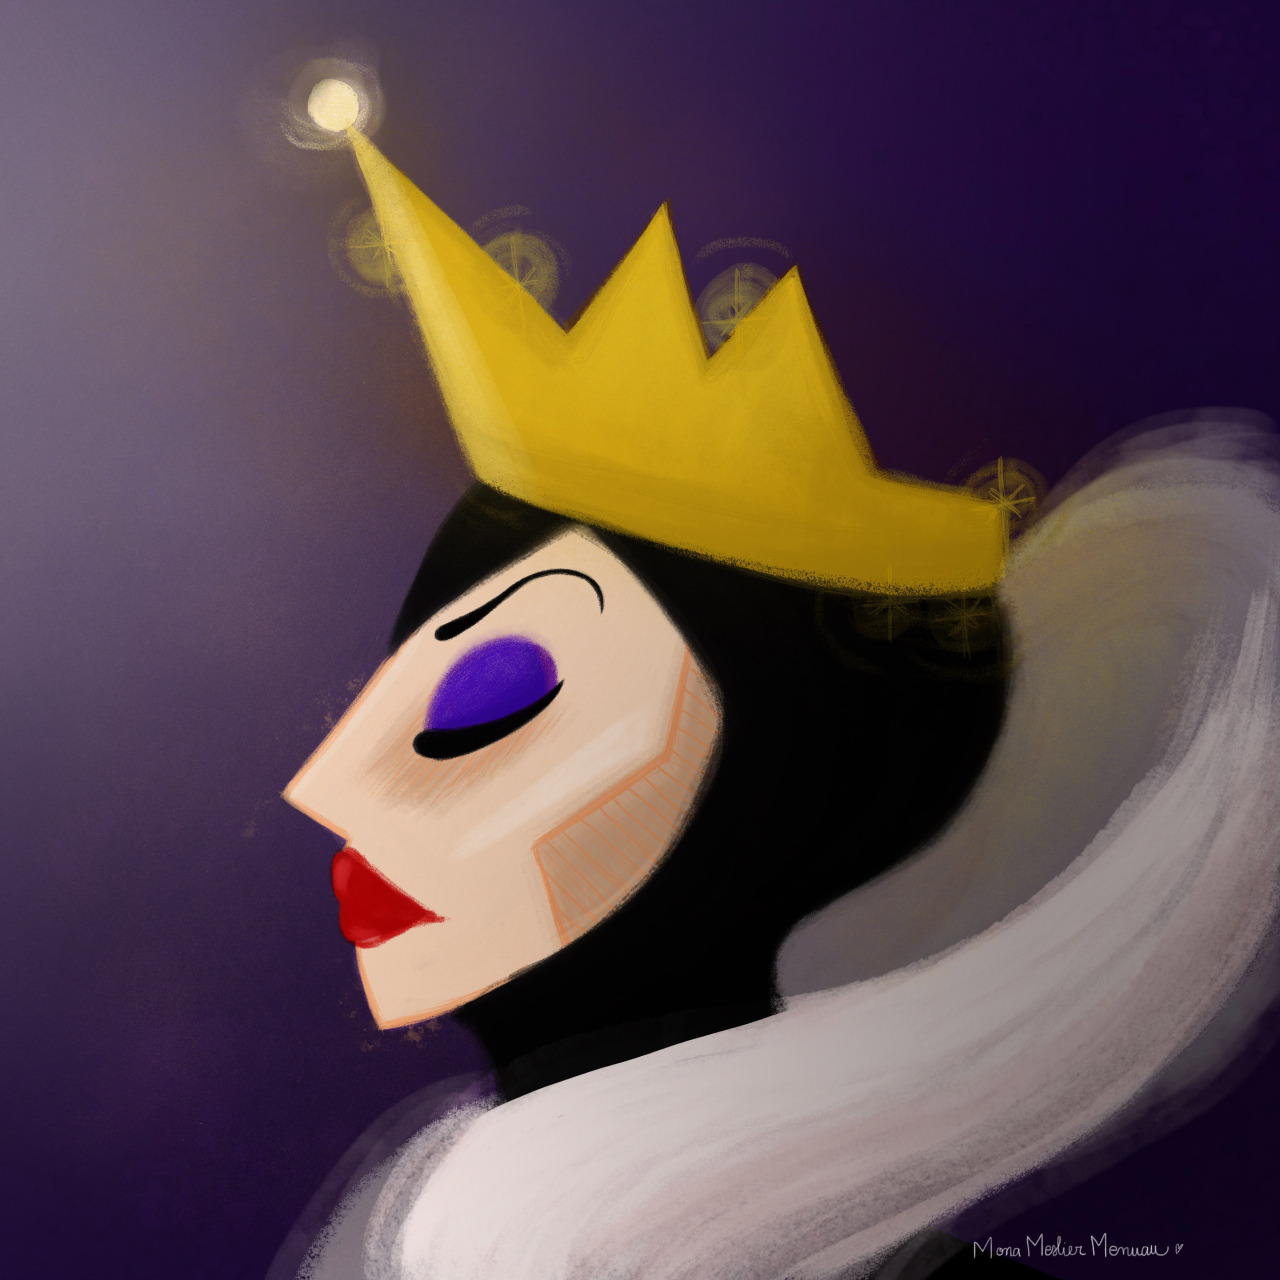 The Evil Queen - by Mona Meslier Menuau  WEBSITE / TUMBLR / SOCIETY6